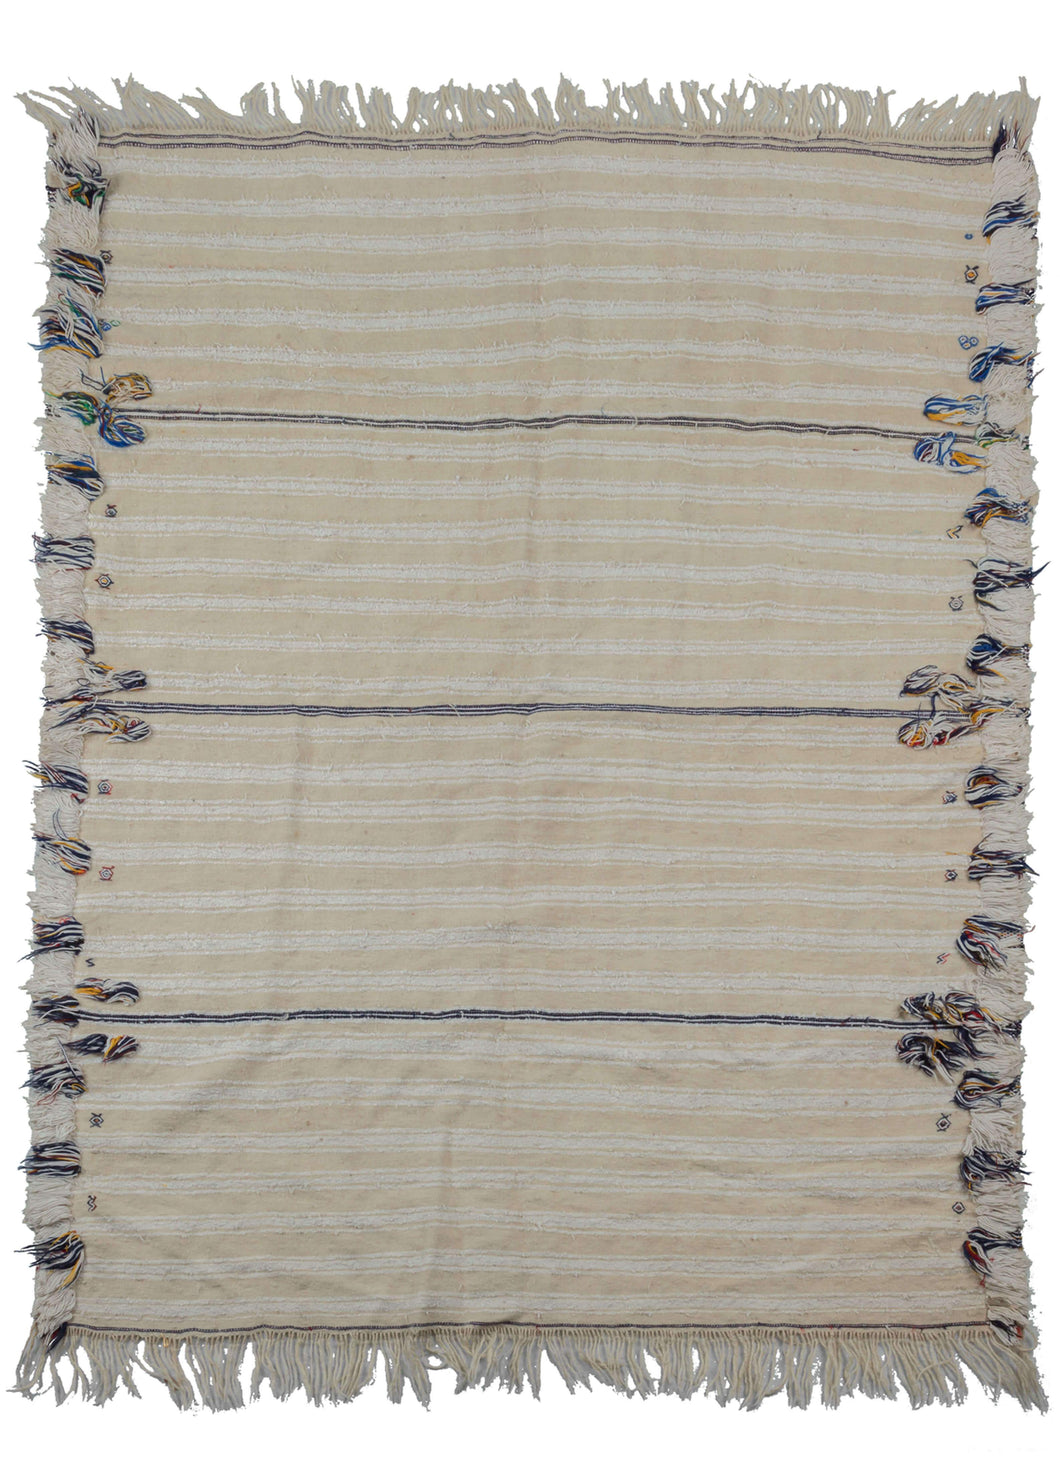 Moroccan wedding blanket that features cream tone on tone horizontal bands which have a perimeter of plush bands of thick pile in white with stray pops of blue, green, yellow and black. One the reverse it features the same horizontal bands, but the perimeter has blocks flatwoven black and white geometric patterning.